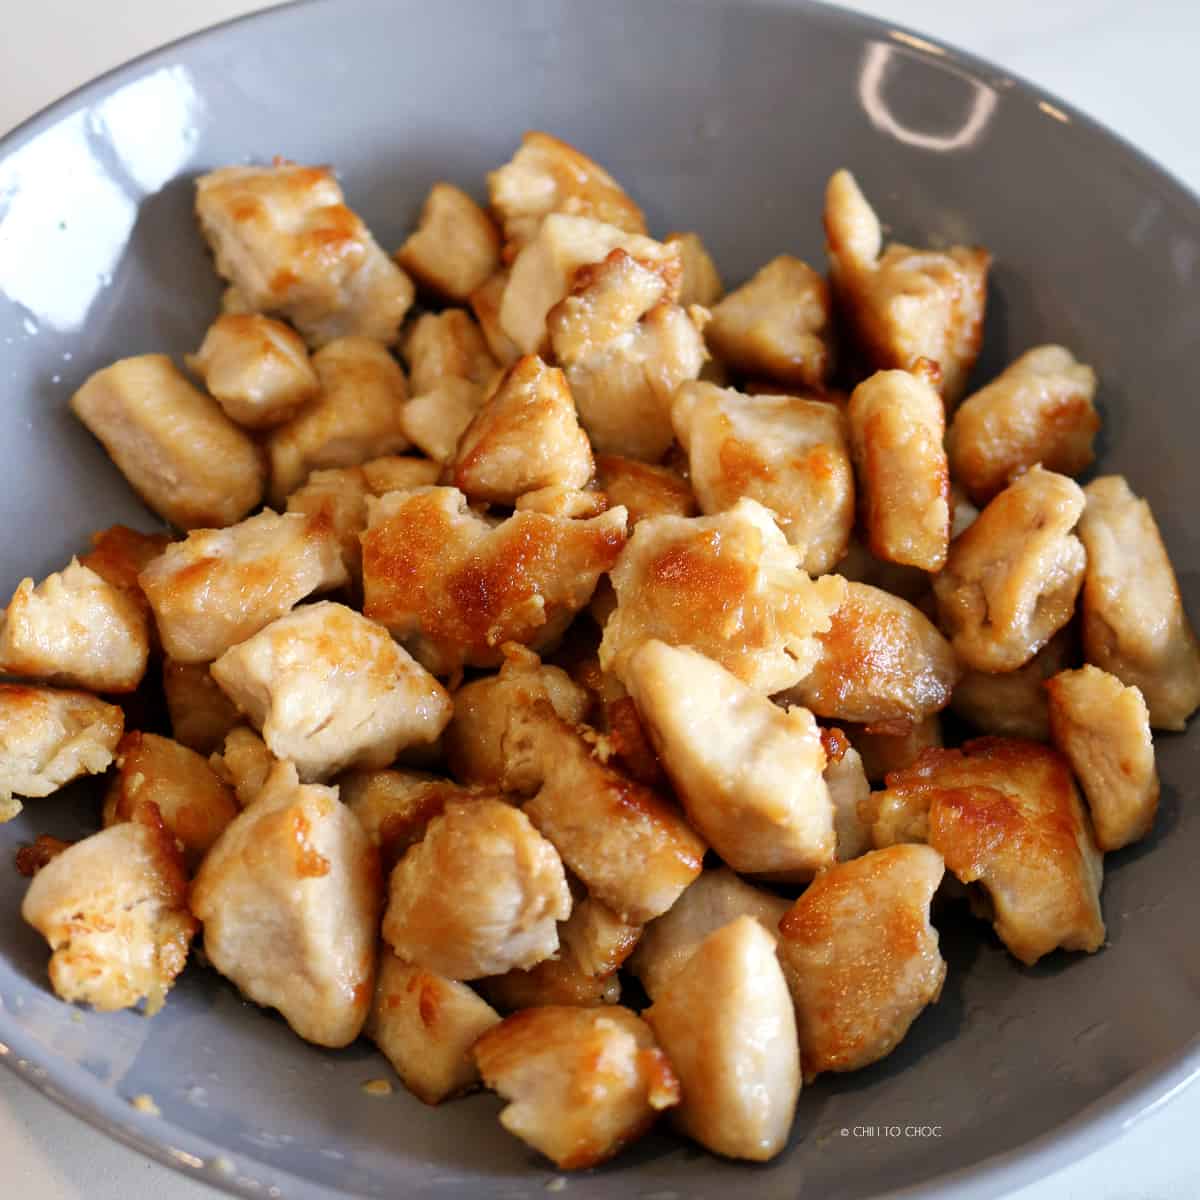 Pan-fried chunks of chicken in a shallow dish